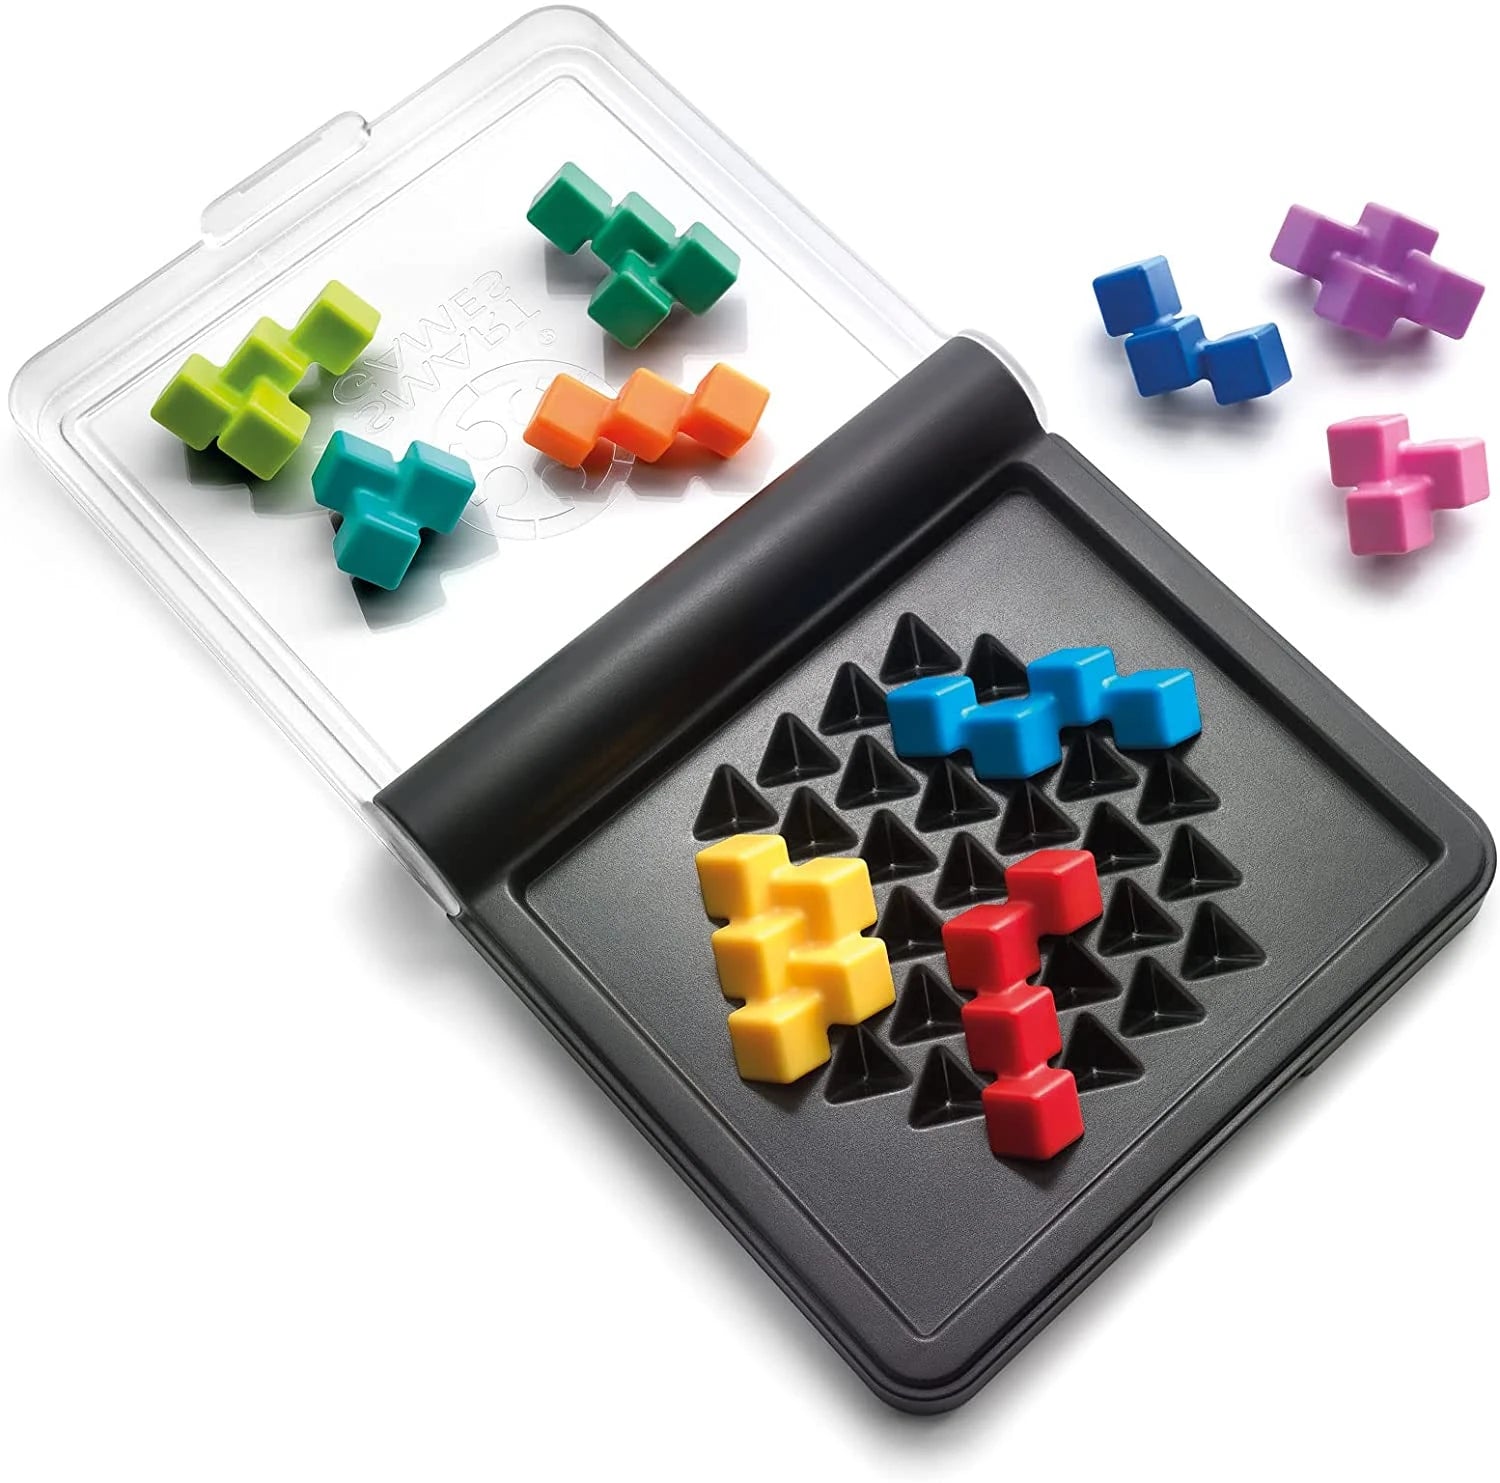 Full unboxing of Smart Games - IQ Fit ONE-Player puzzle for Kids, Best  Puzzle game with, IQ Fit includes 120 challenges ( easy to expert) in a  very Compact case .